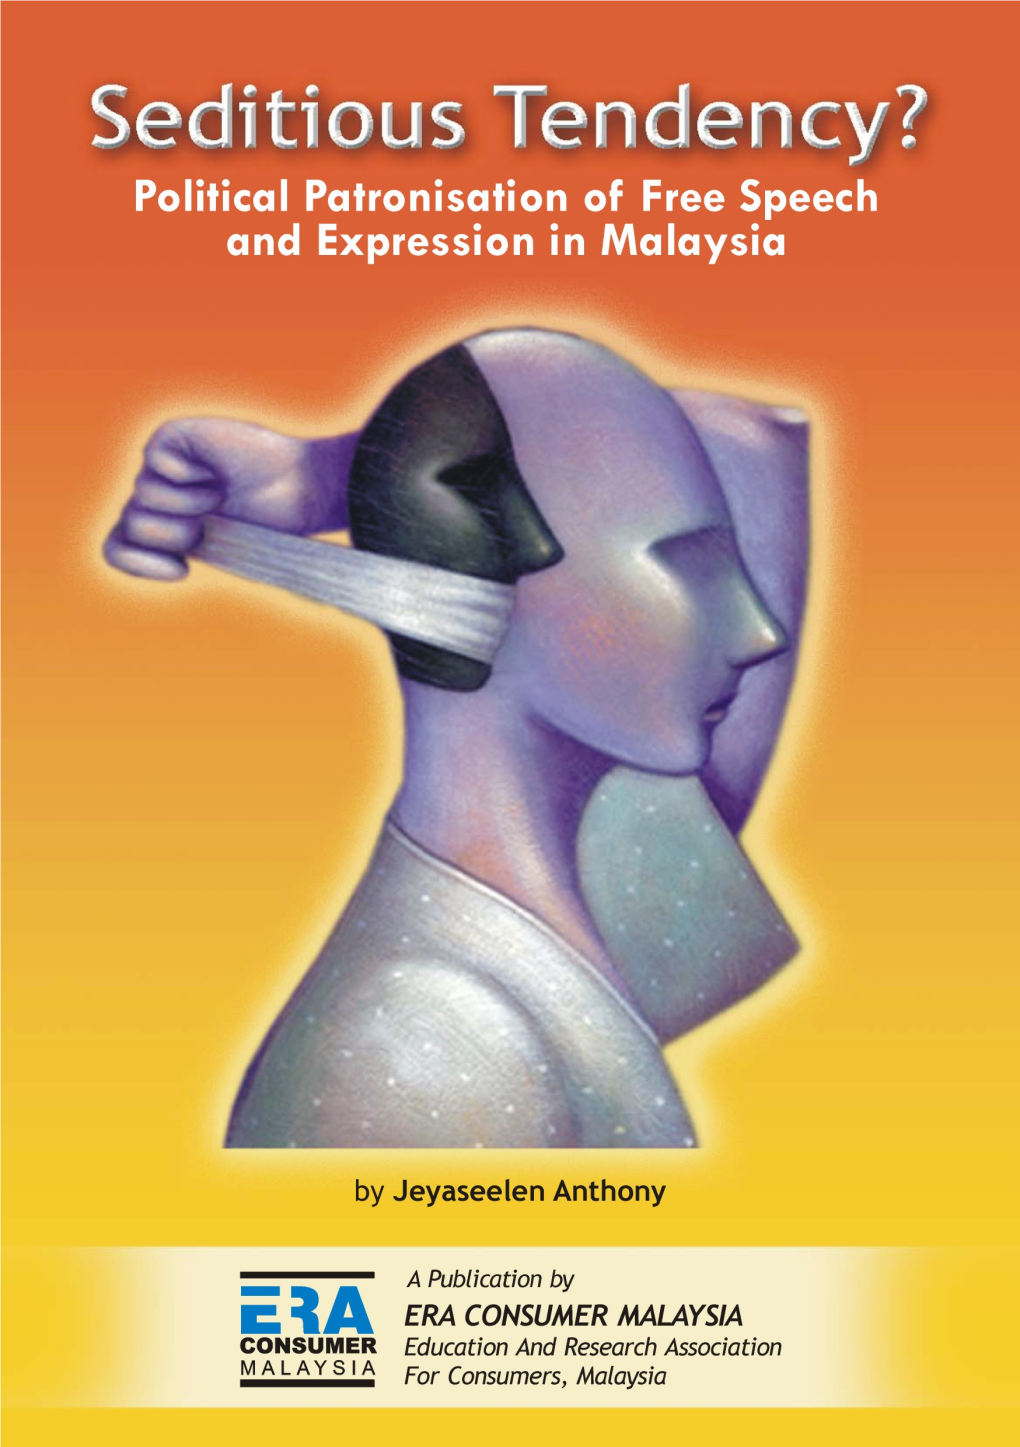 SEDITIOUS TENDENCY? Political Patronisation of Free Speech and Expression in Malaysia